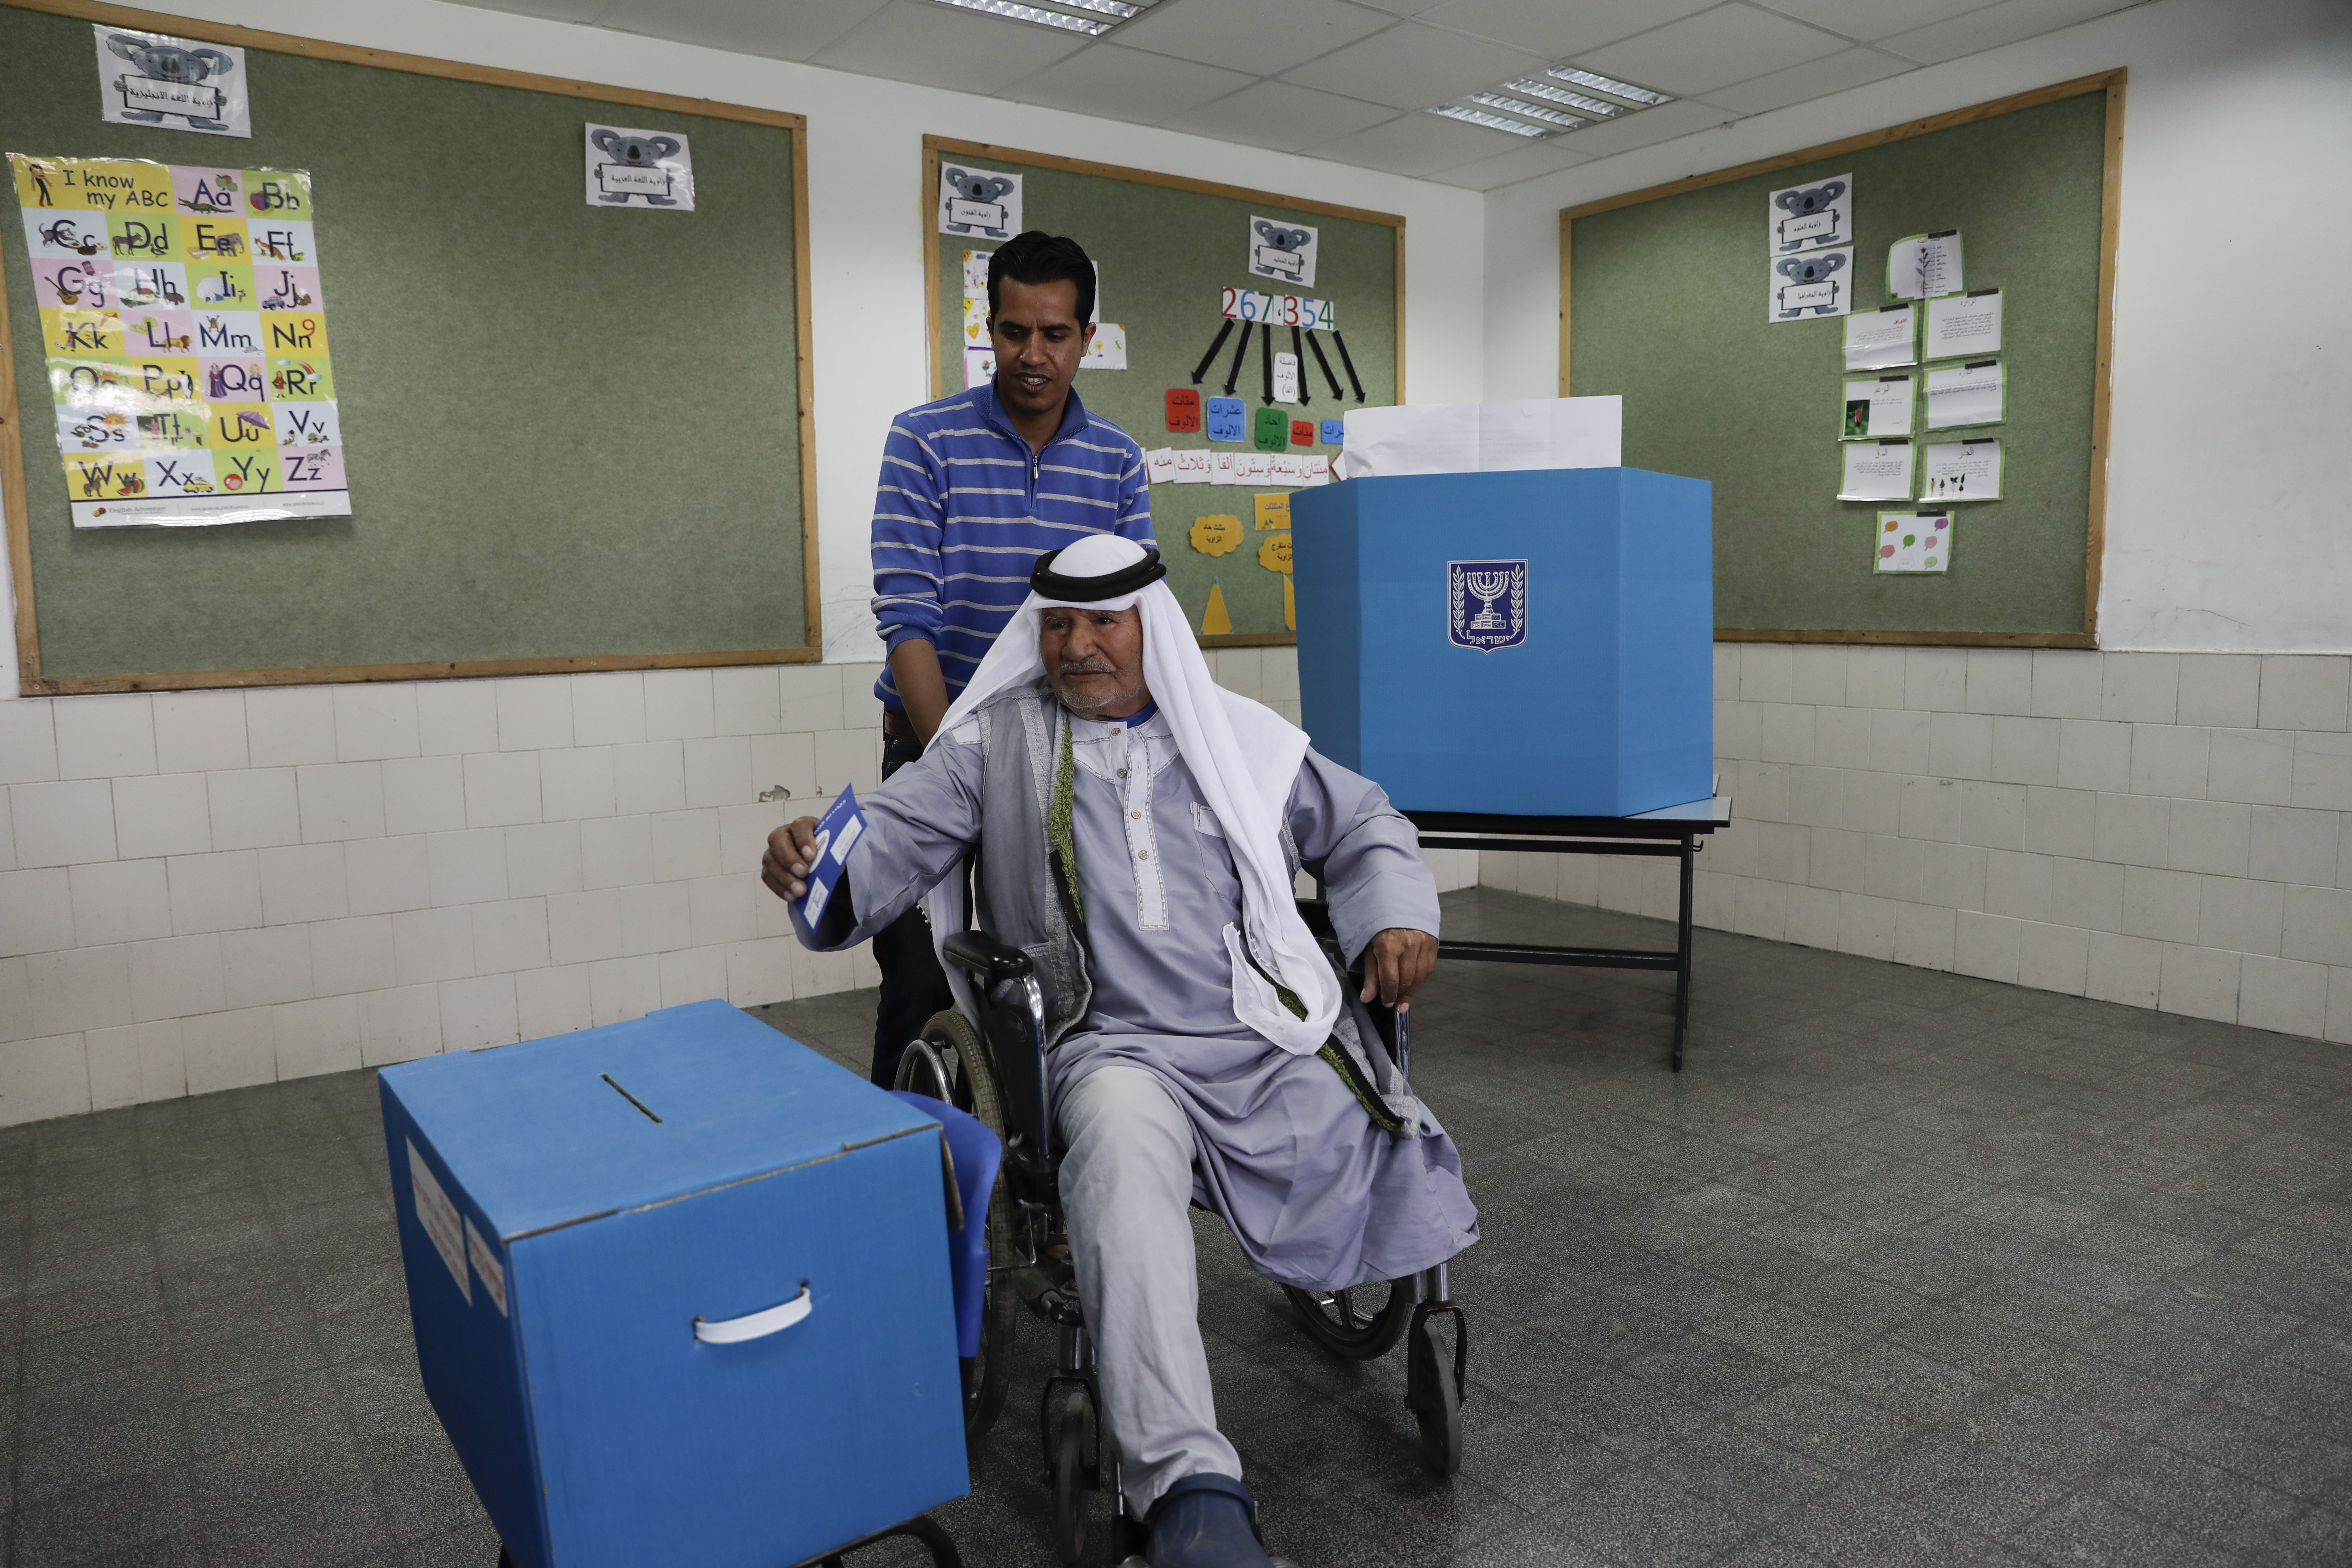 Israeli Bedouin votes during general elections in the city of Rahat, Tuesday, April 9, 2019. (AP Photo/Tsafrir Abayov)